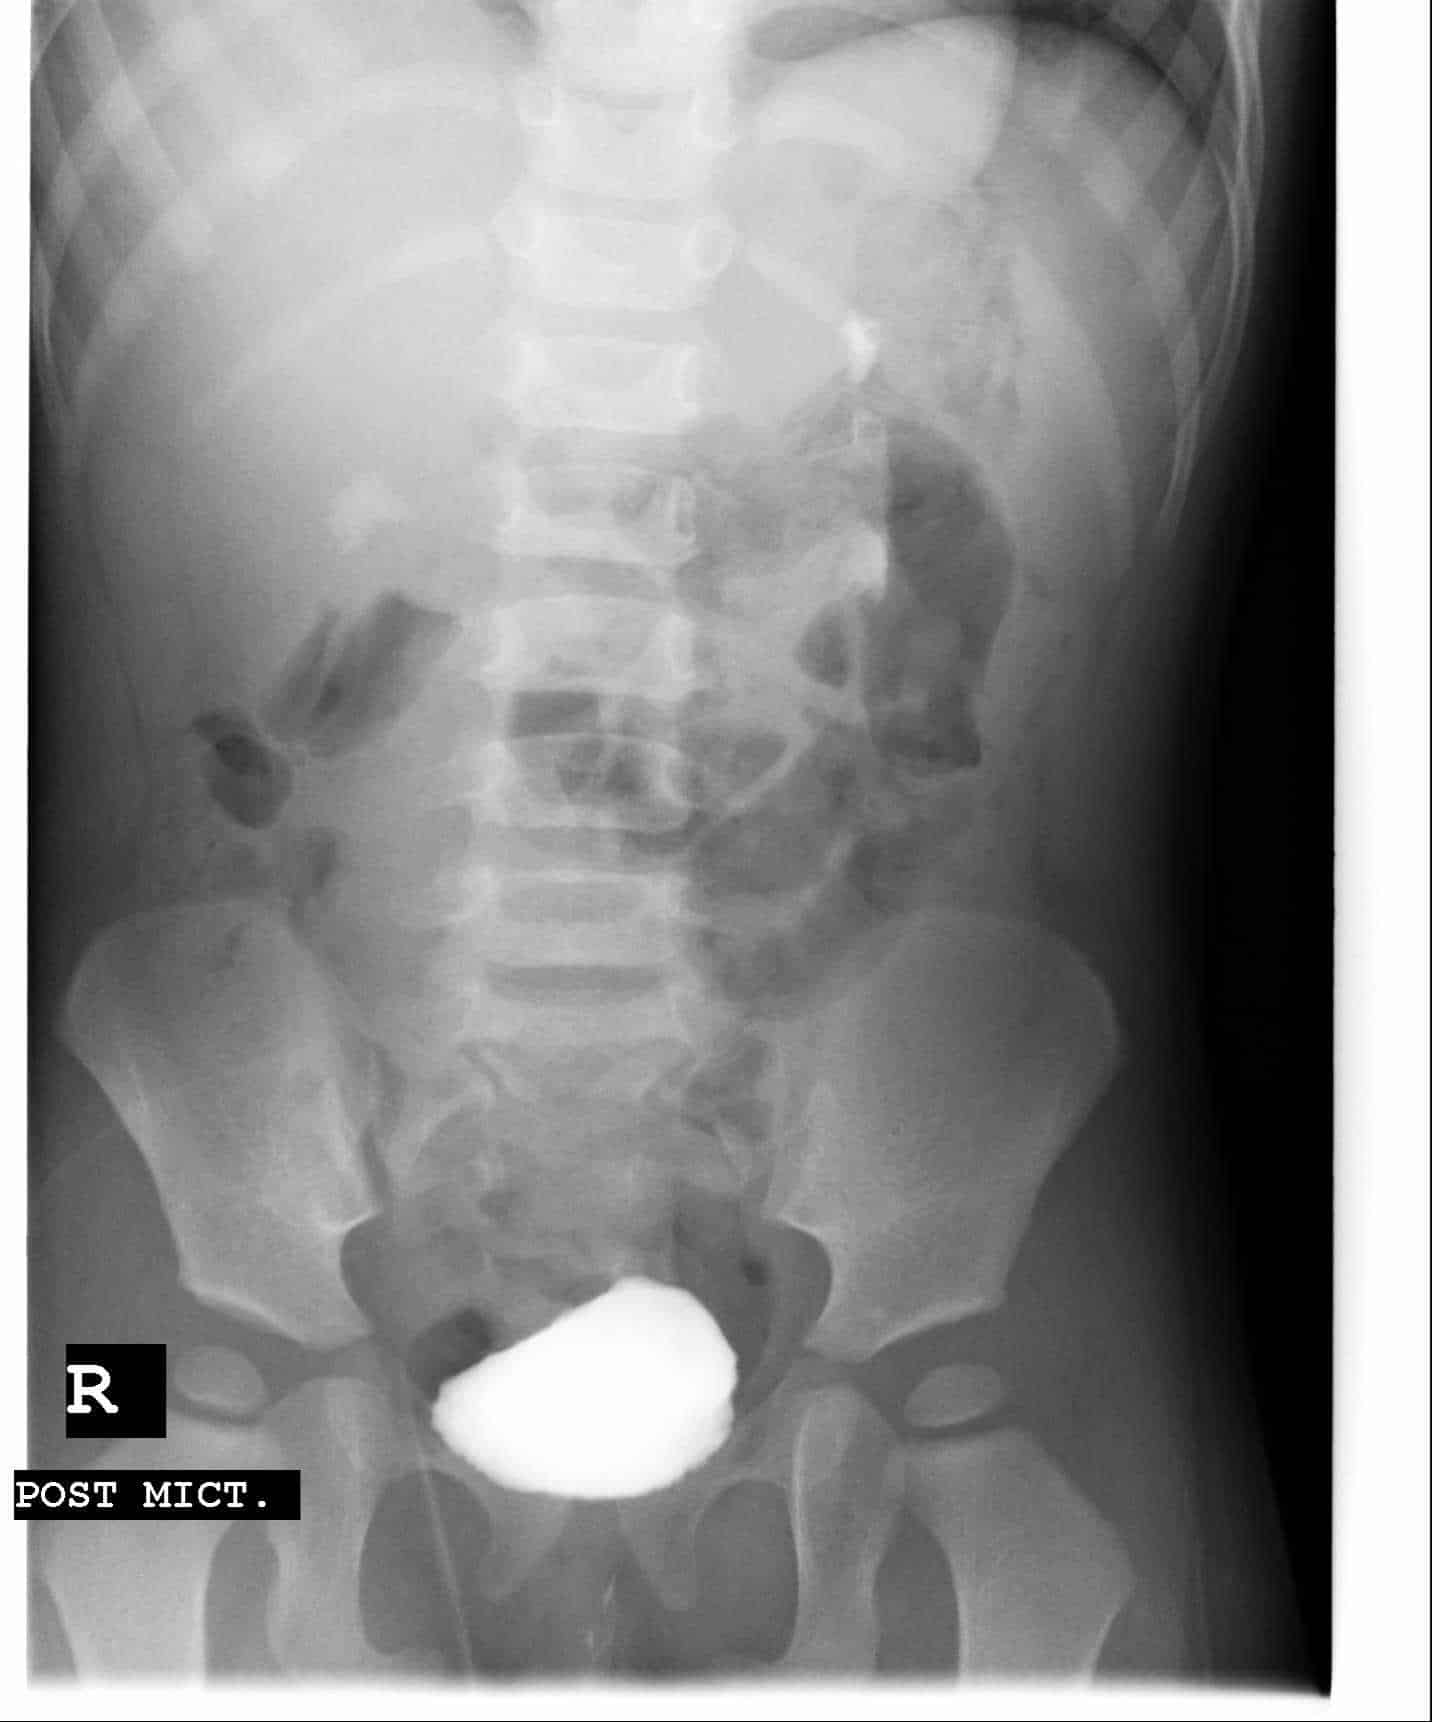 Right Renal Calculus with Bilateral Vesico Ureteric Reflux « Child ...